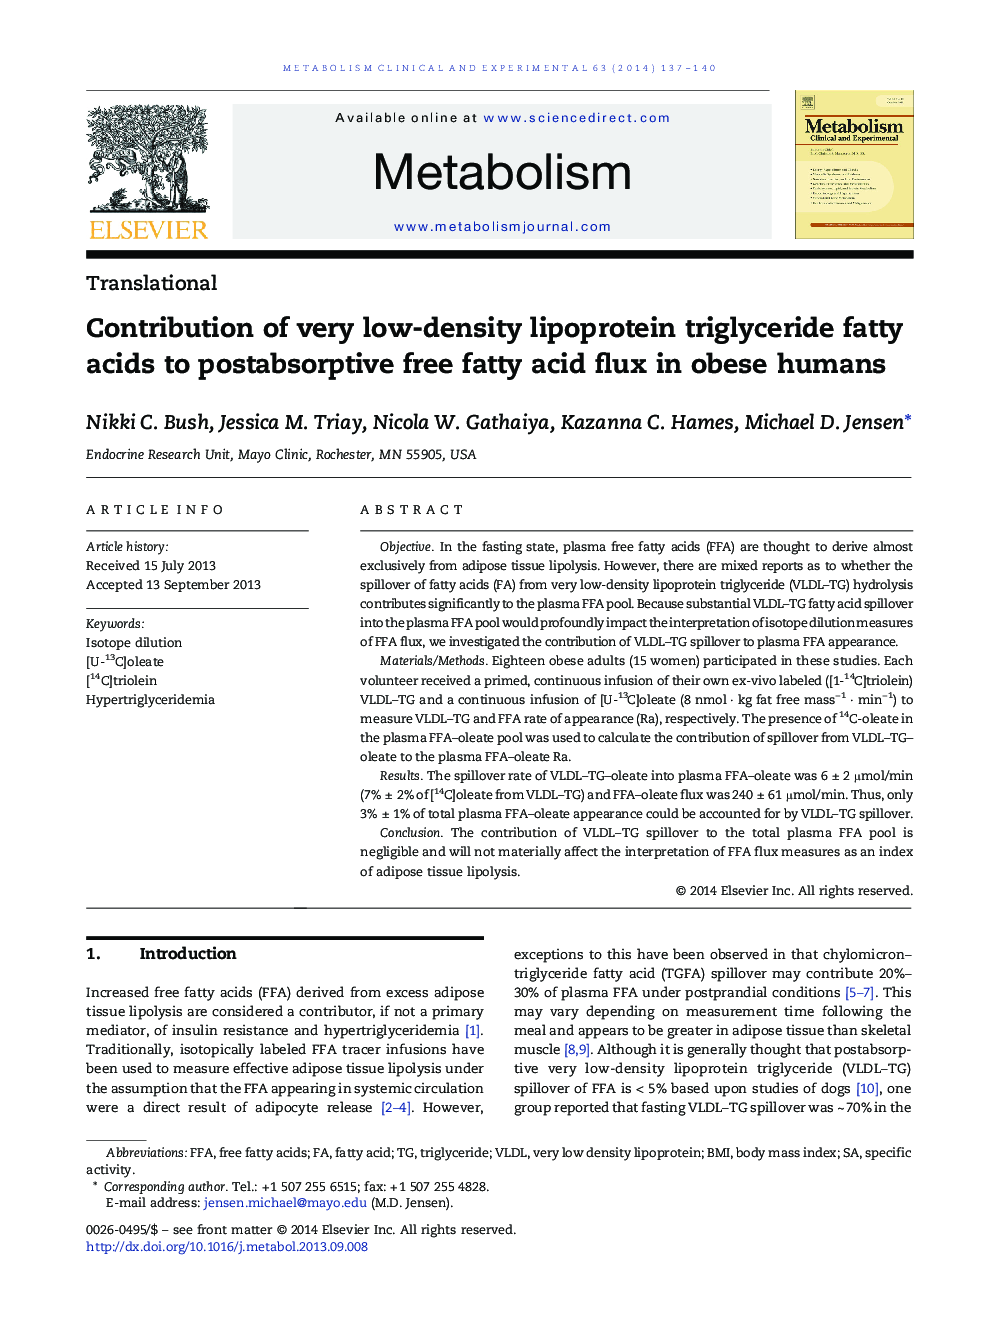 Contribution of very low-density lipoprotein triglyceride fatty acids to postabsorptive free fatty acid flux in obese humans